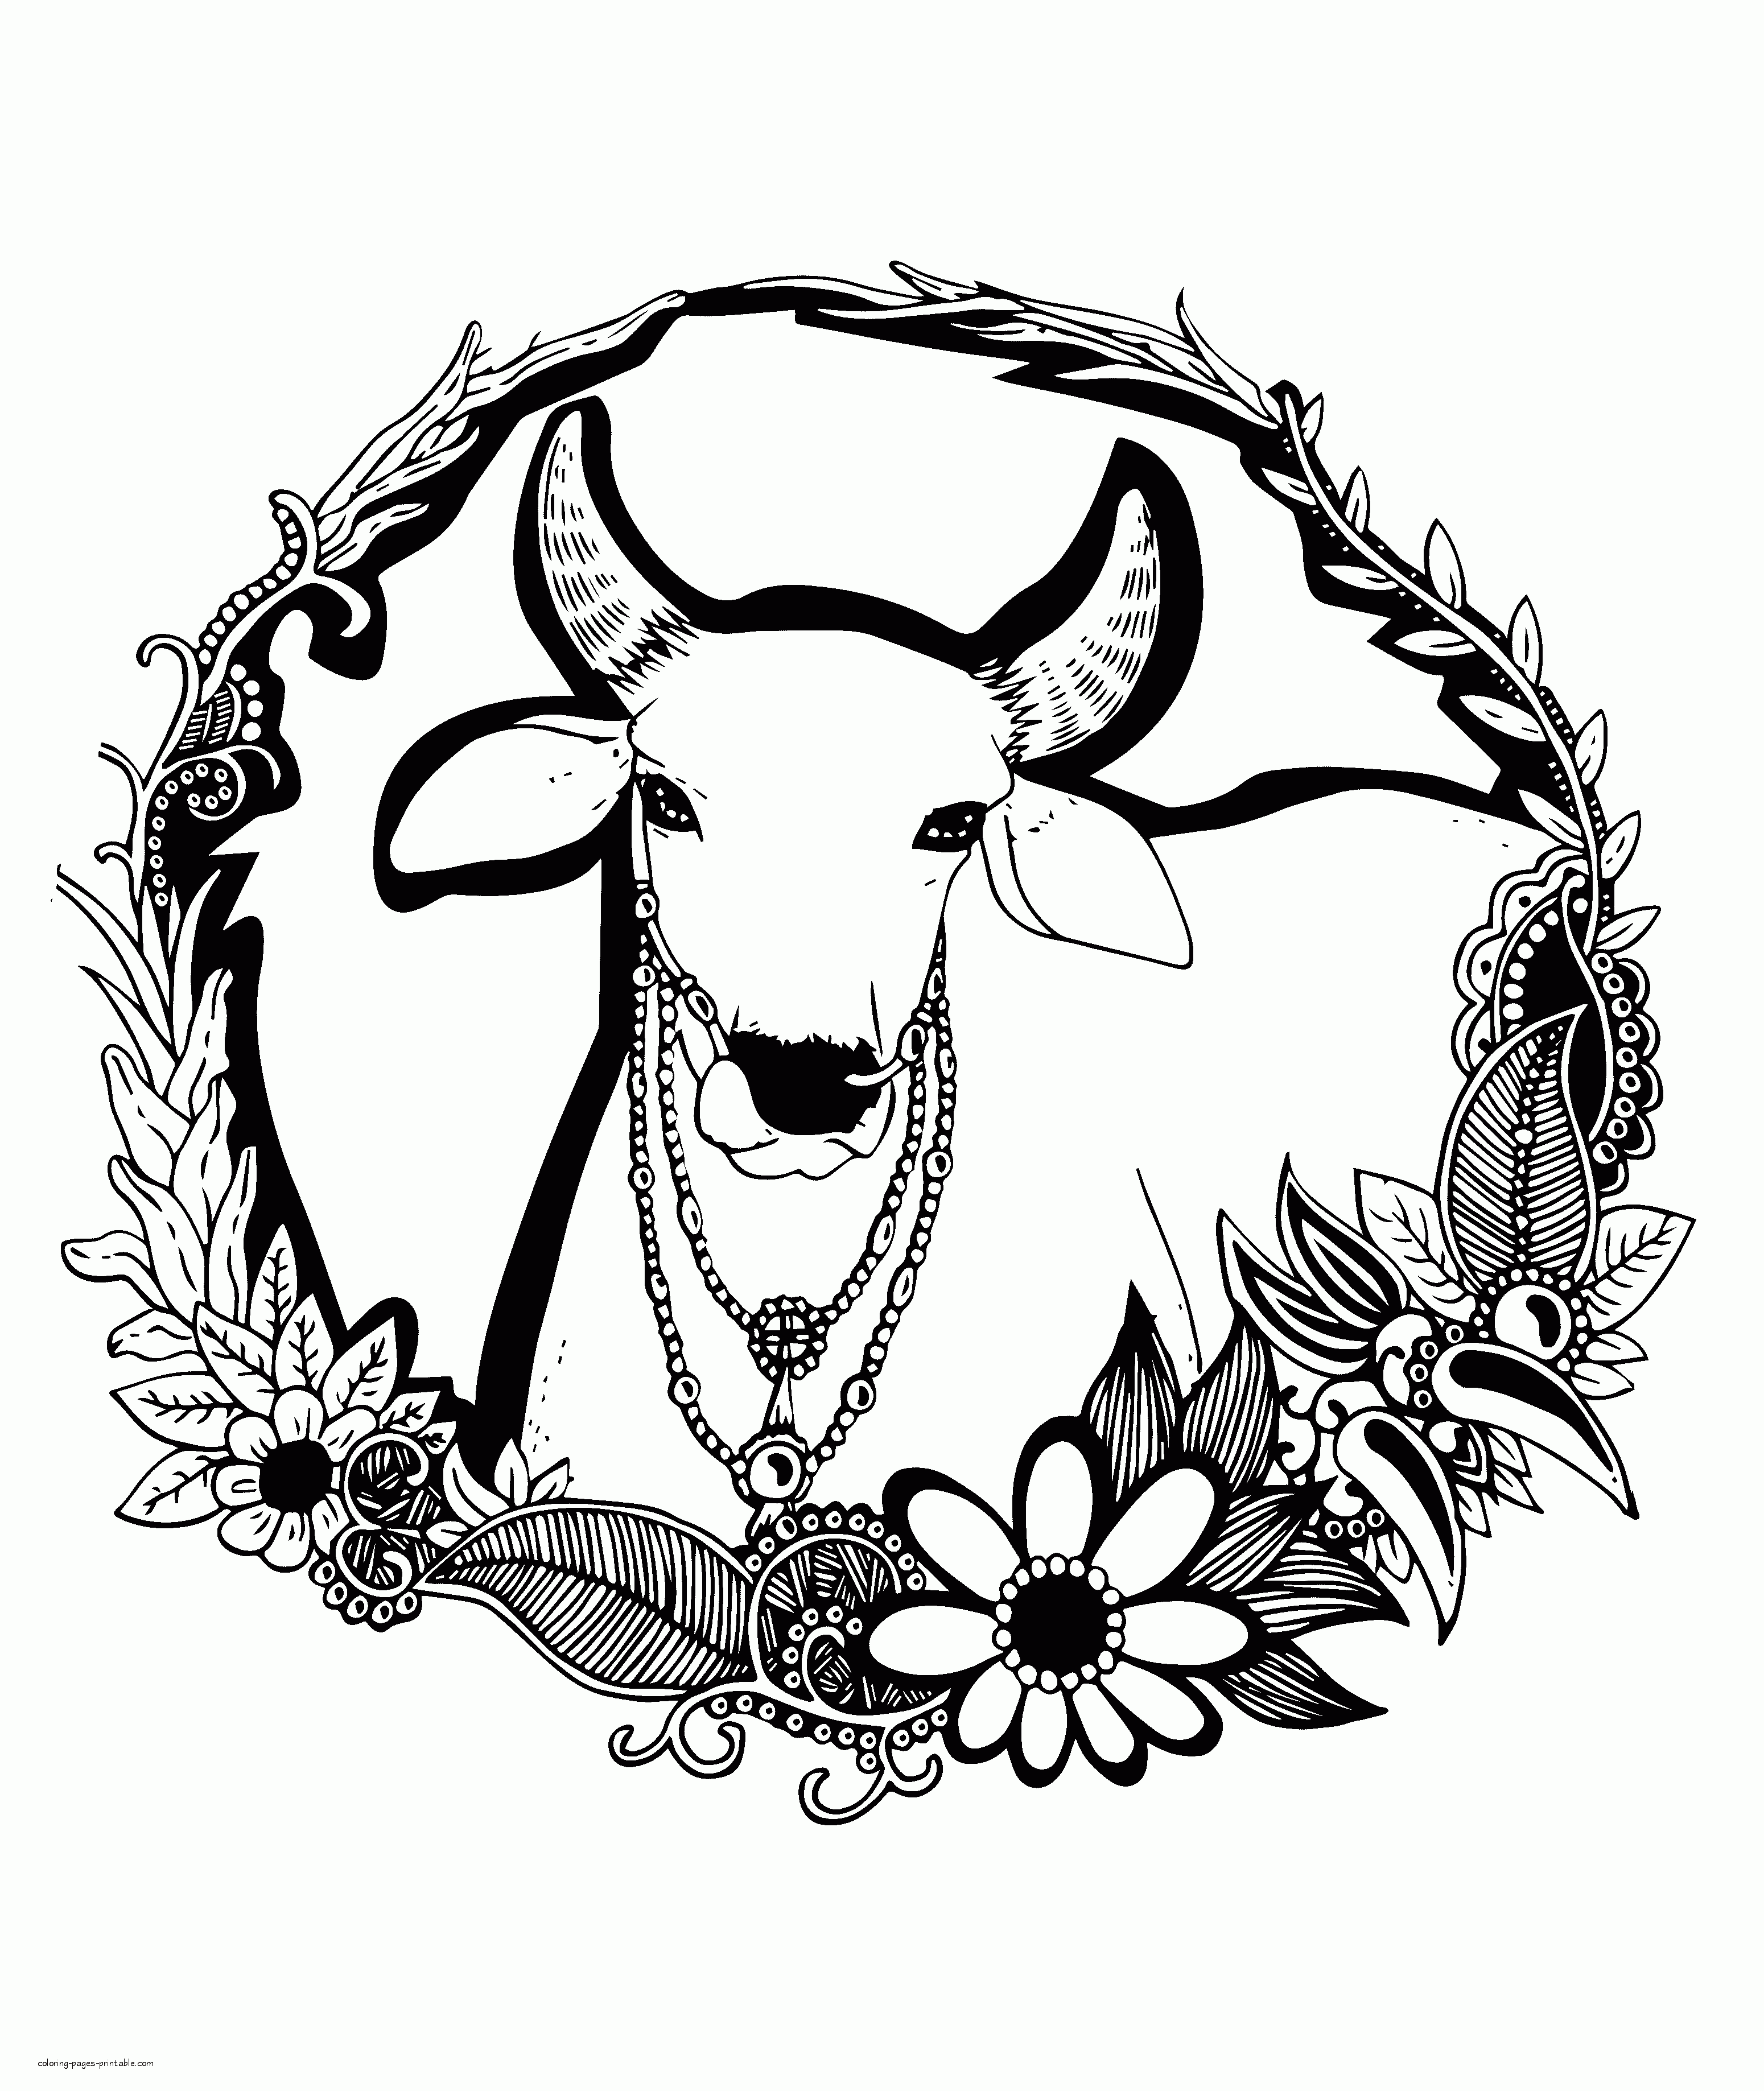 Cow Coloring Page For Adults || COLORING-PAGES-PRINTABLE.COM